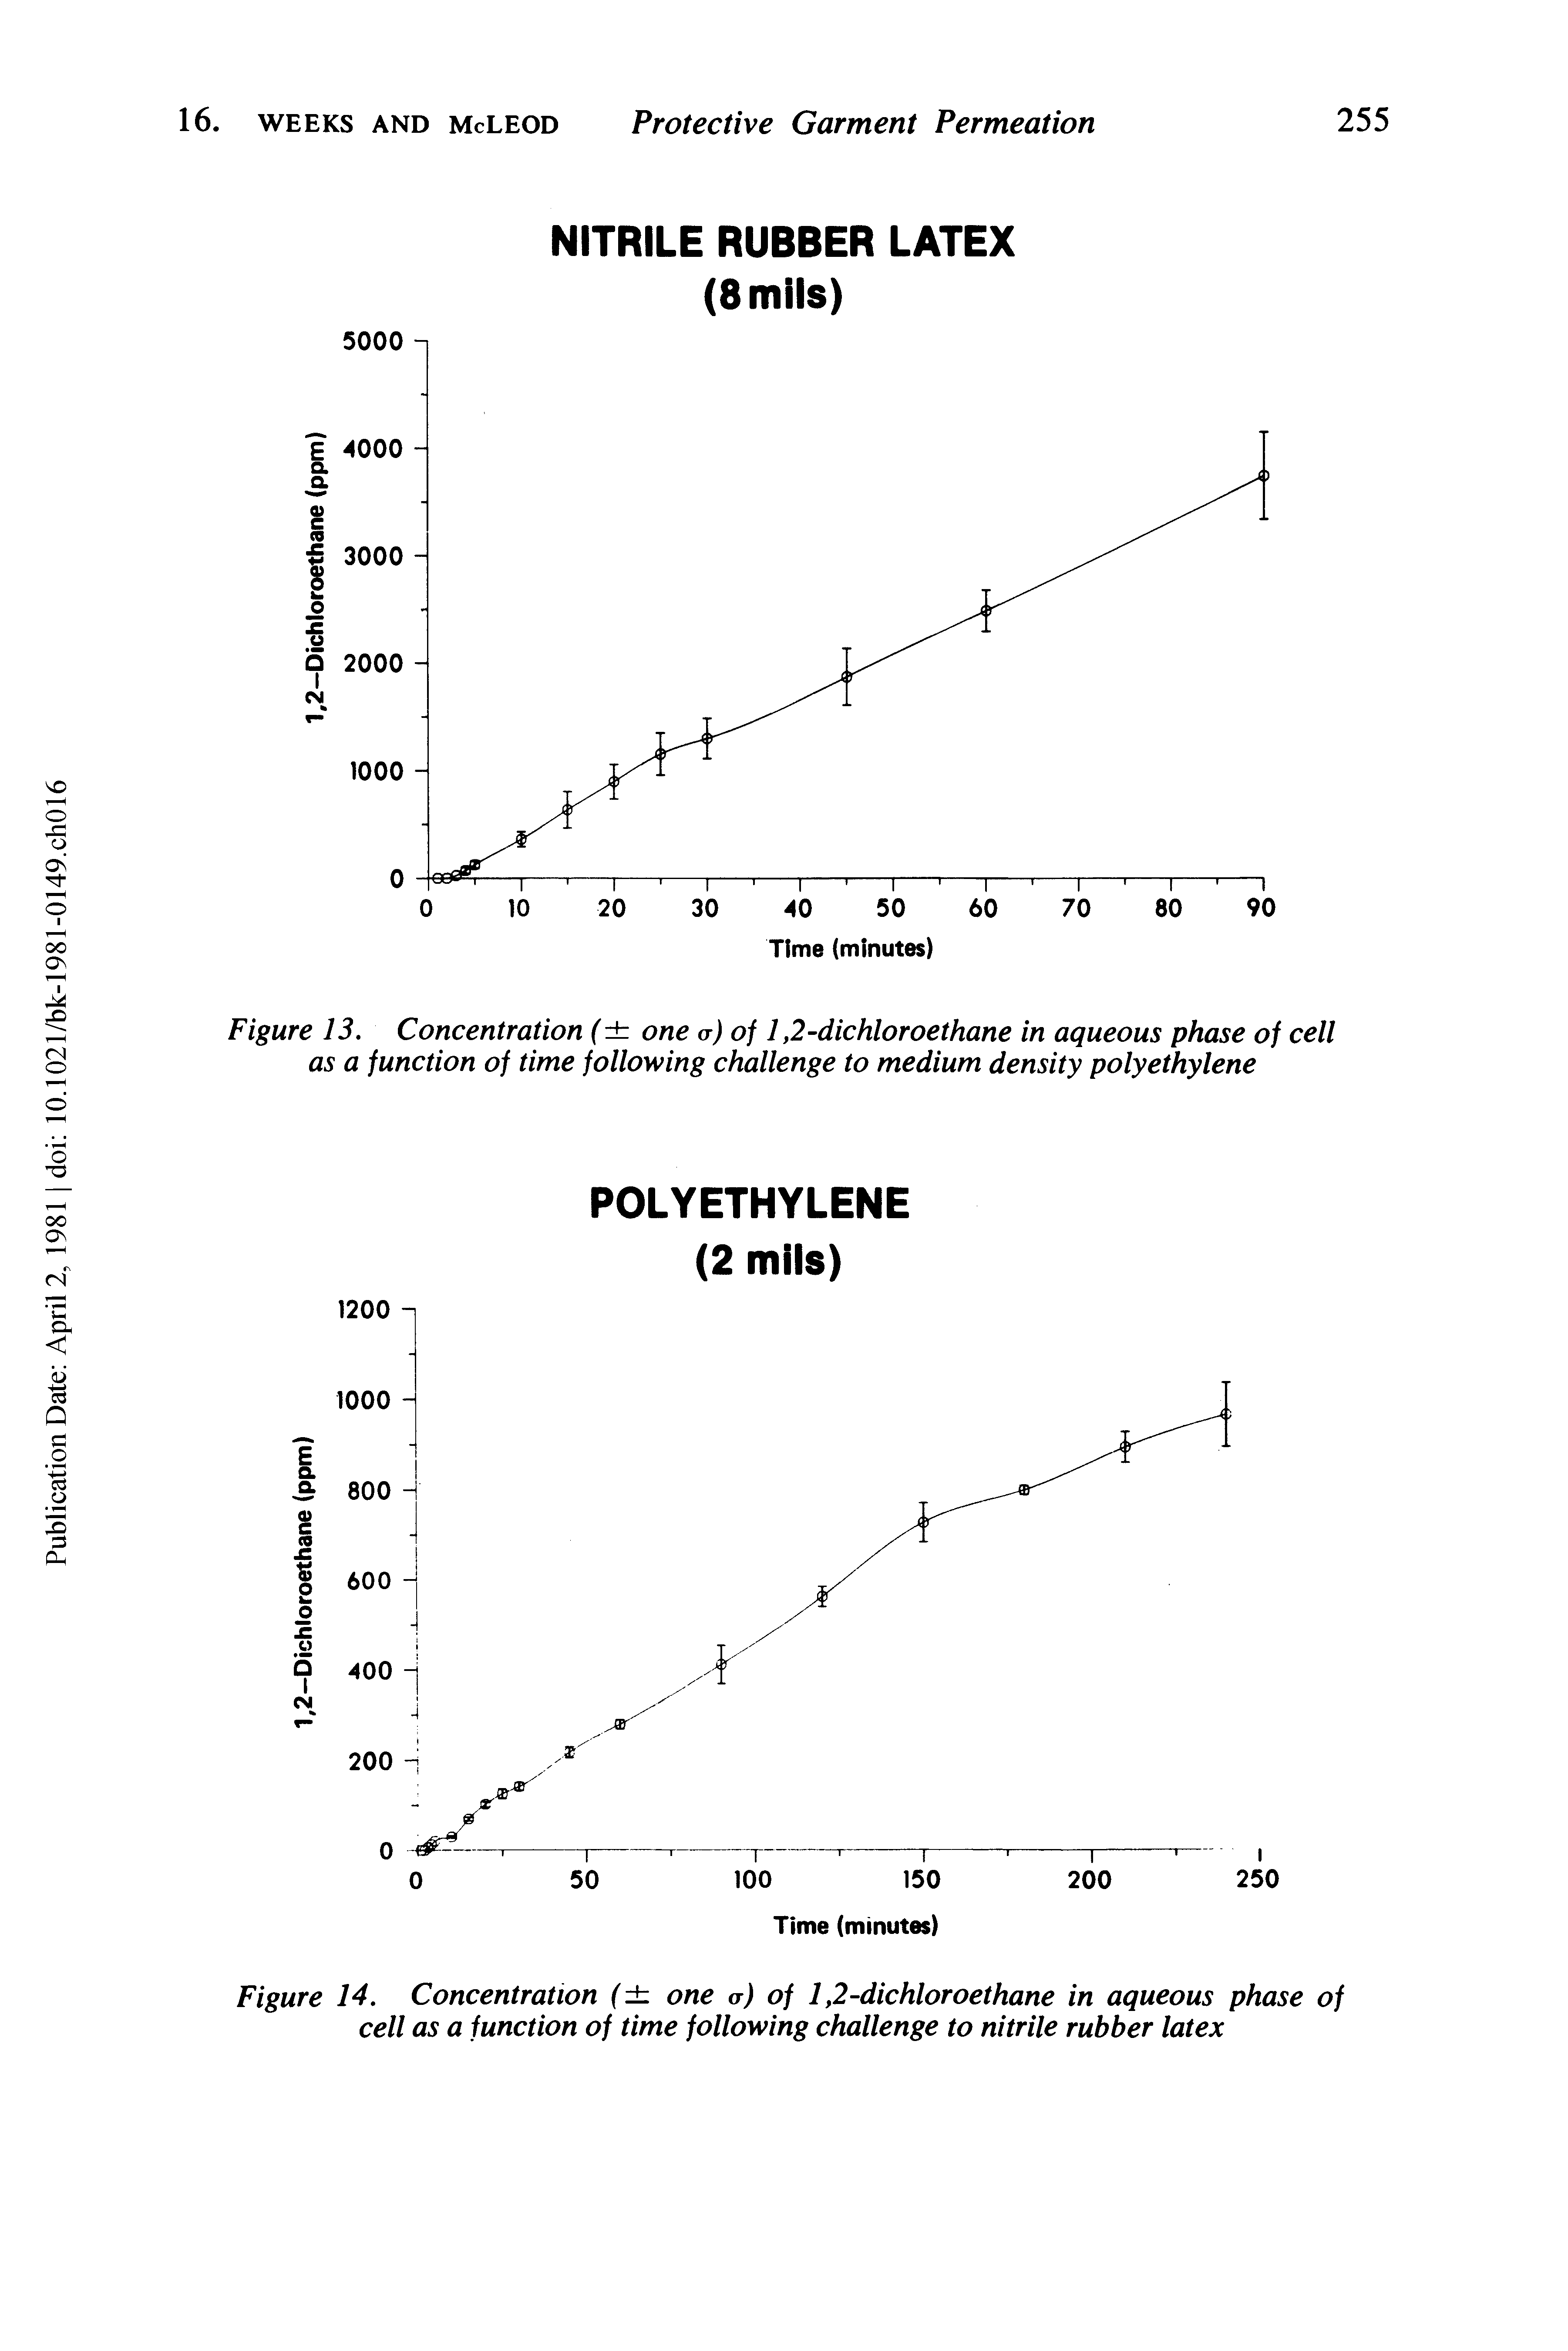 Figure 13. Concentration ( one a) of 1,2-dichloroethane in aqueous phase of cell as a function of time following challenge to medium density polyethylene...